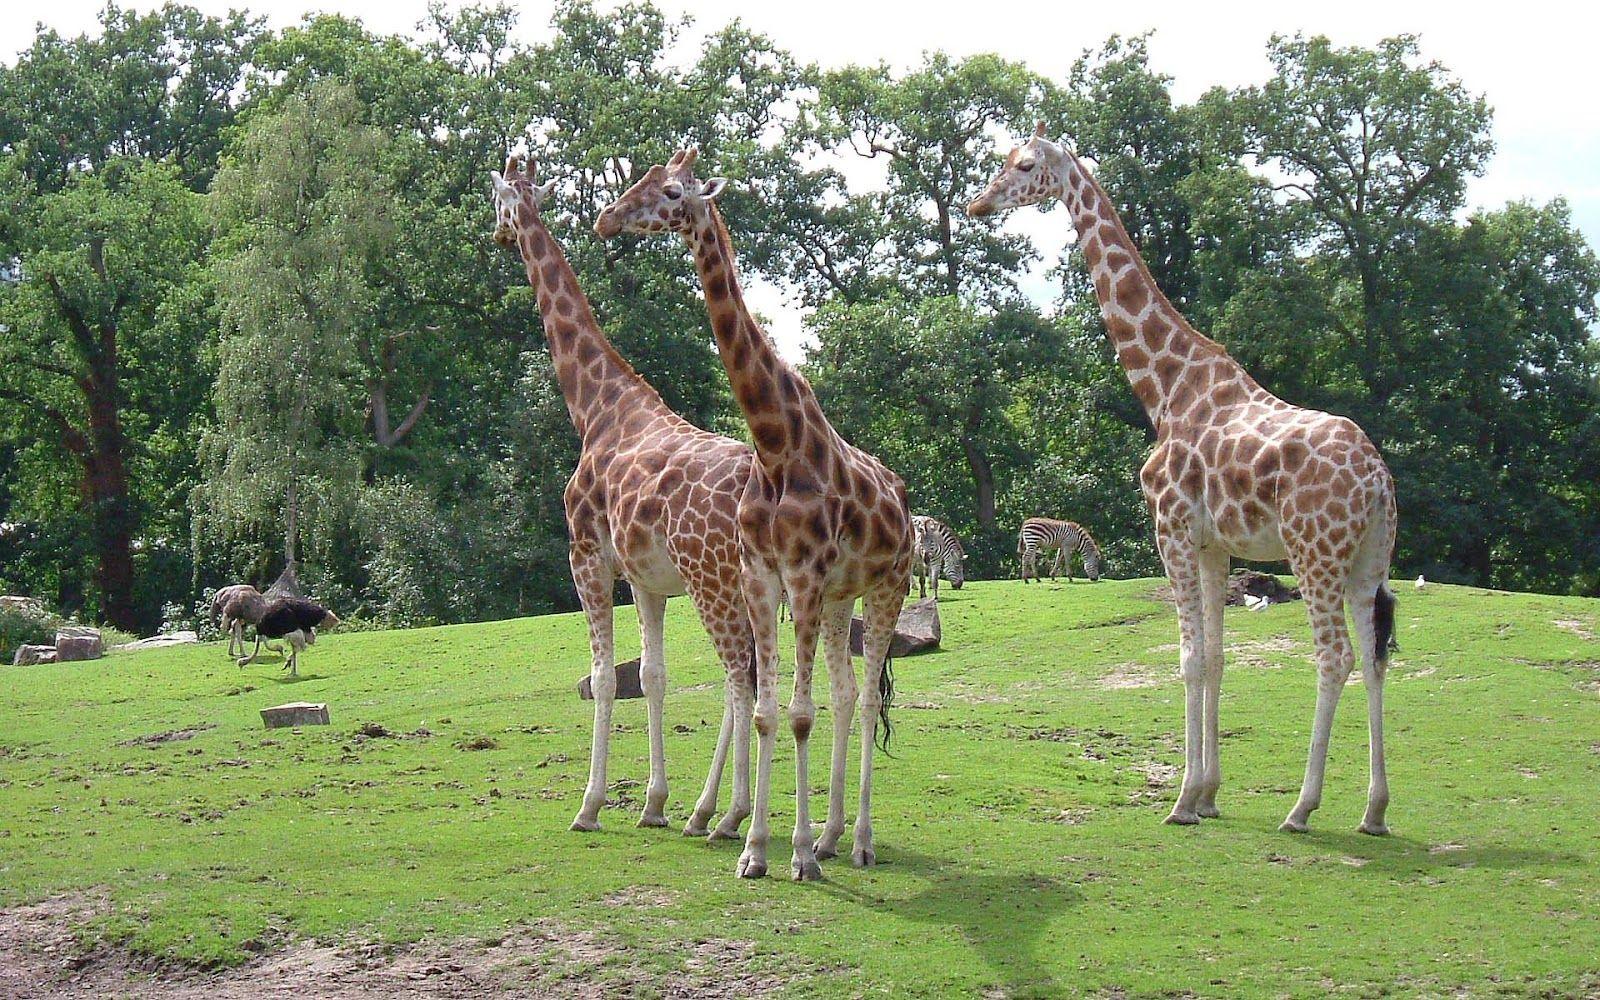 Photo of a group giraffes in the zoo. HD Animals Wallpaper